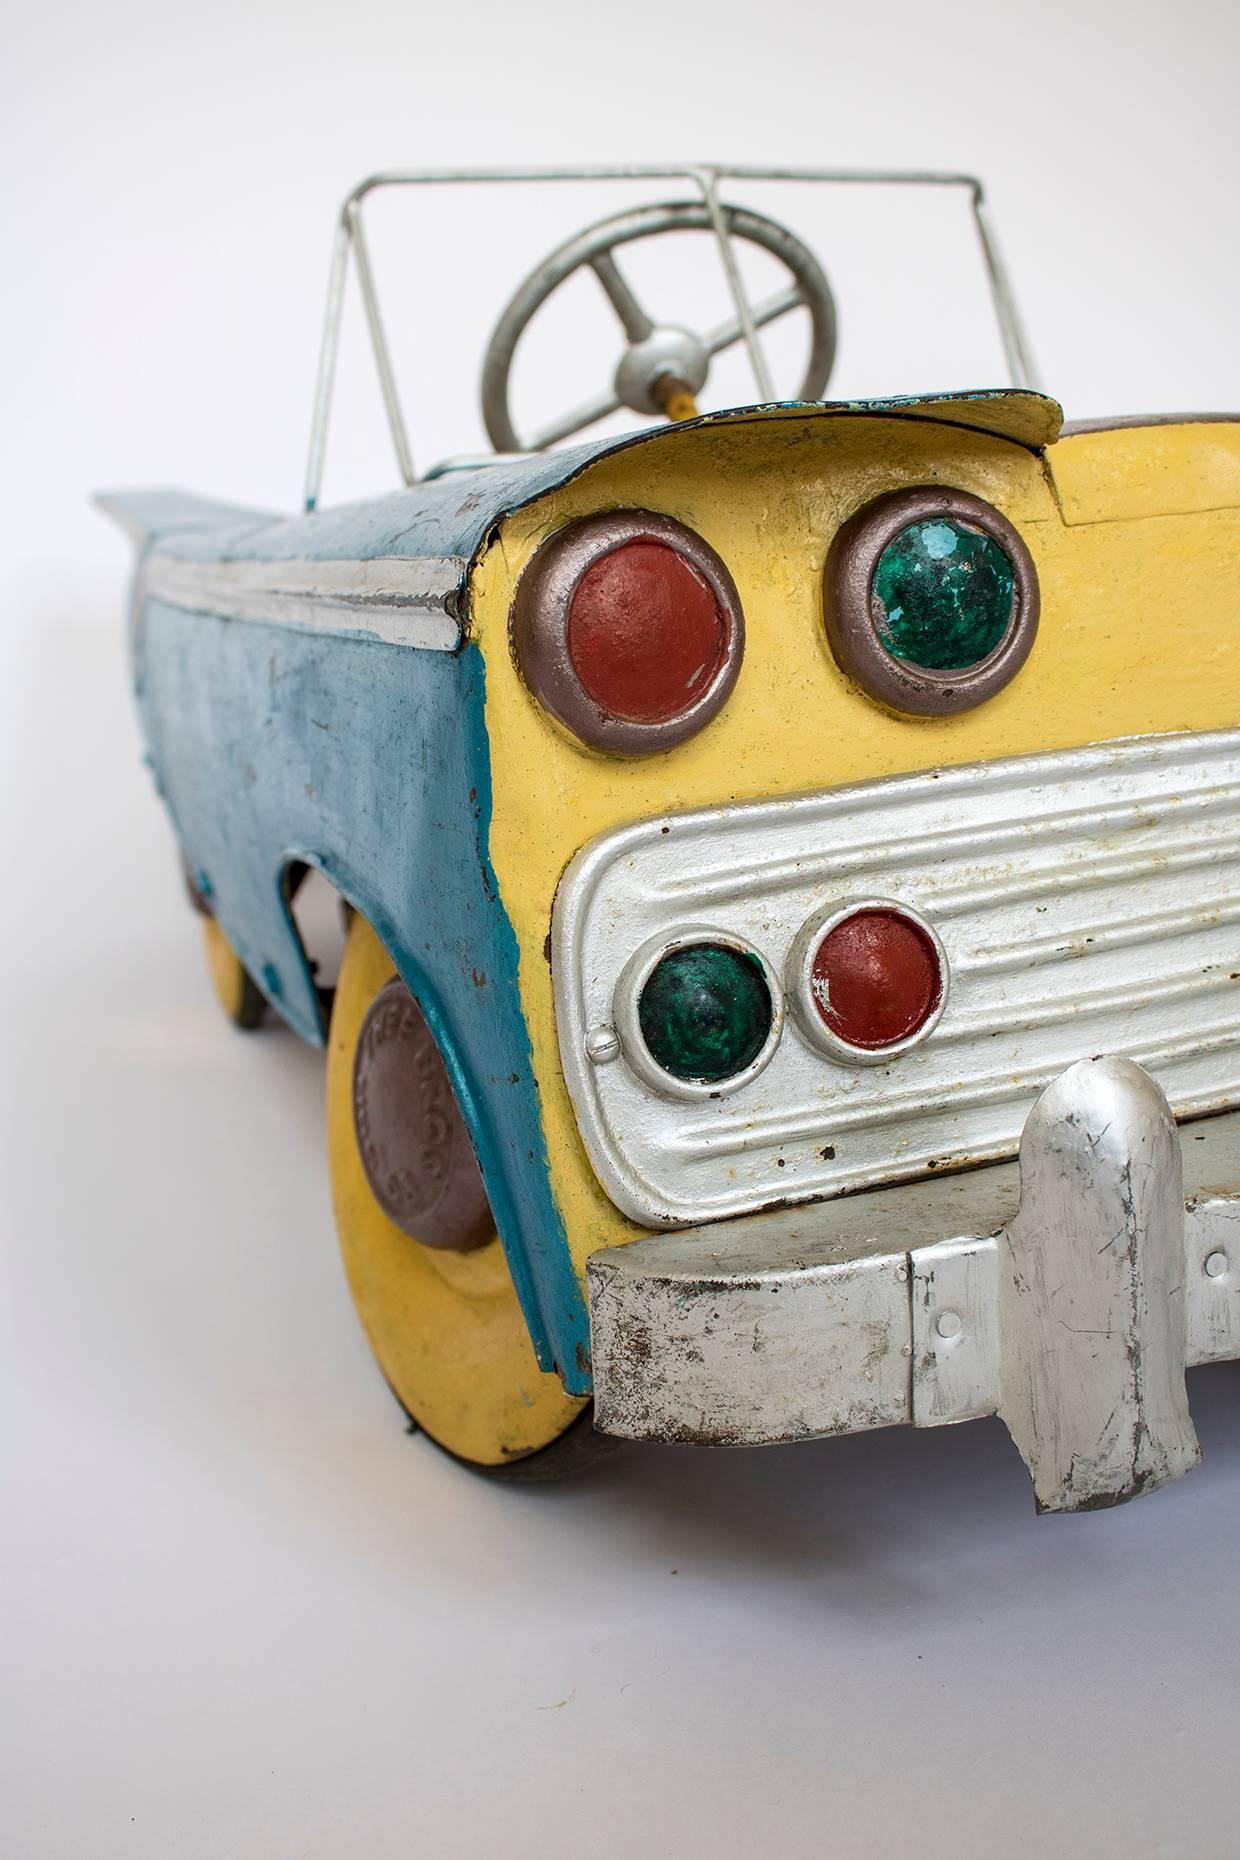 Unusual Burmese Painted Model Pedal Car, circa 1950s -1960s Childs Toy For Sale 2